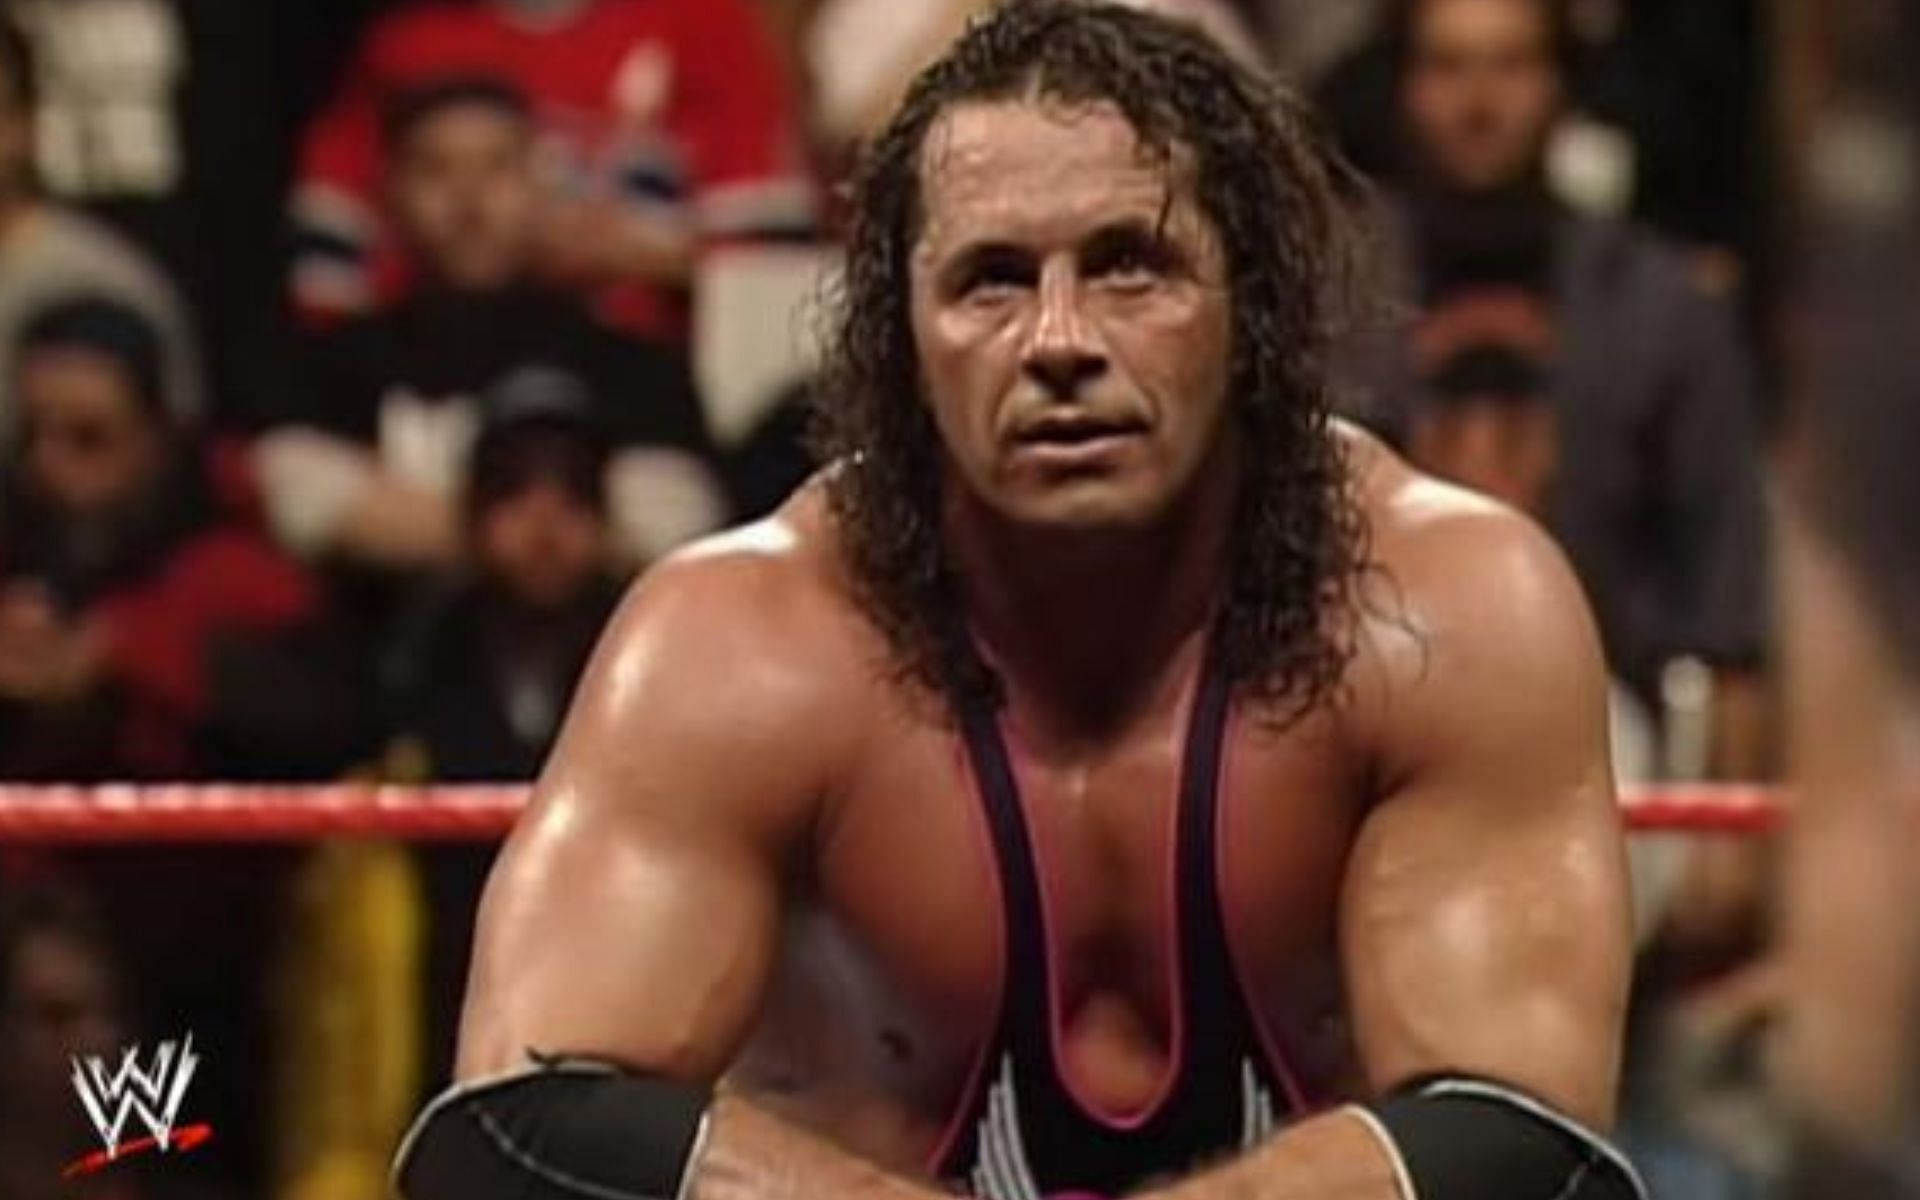 Bret Hart won the Royal Rumble with Lex Luger